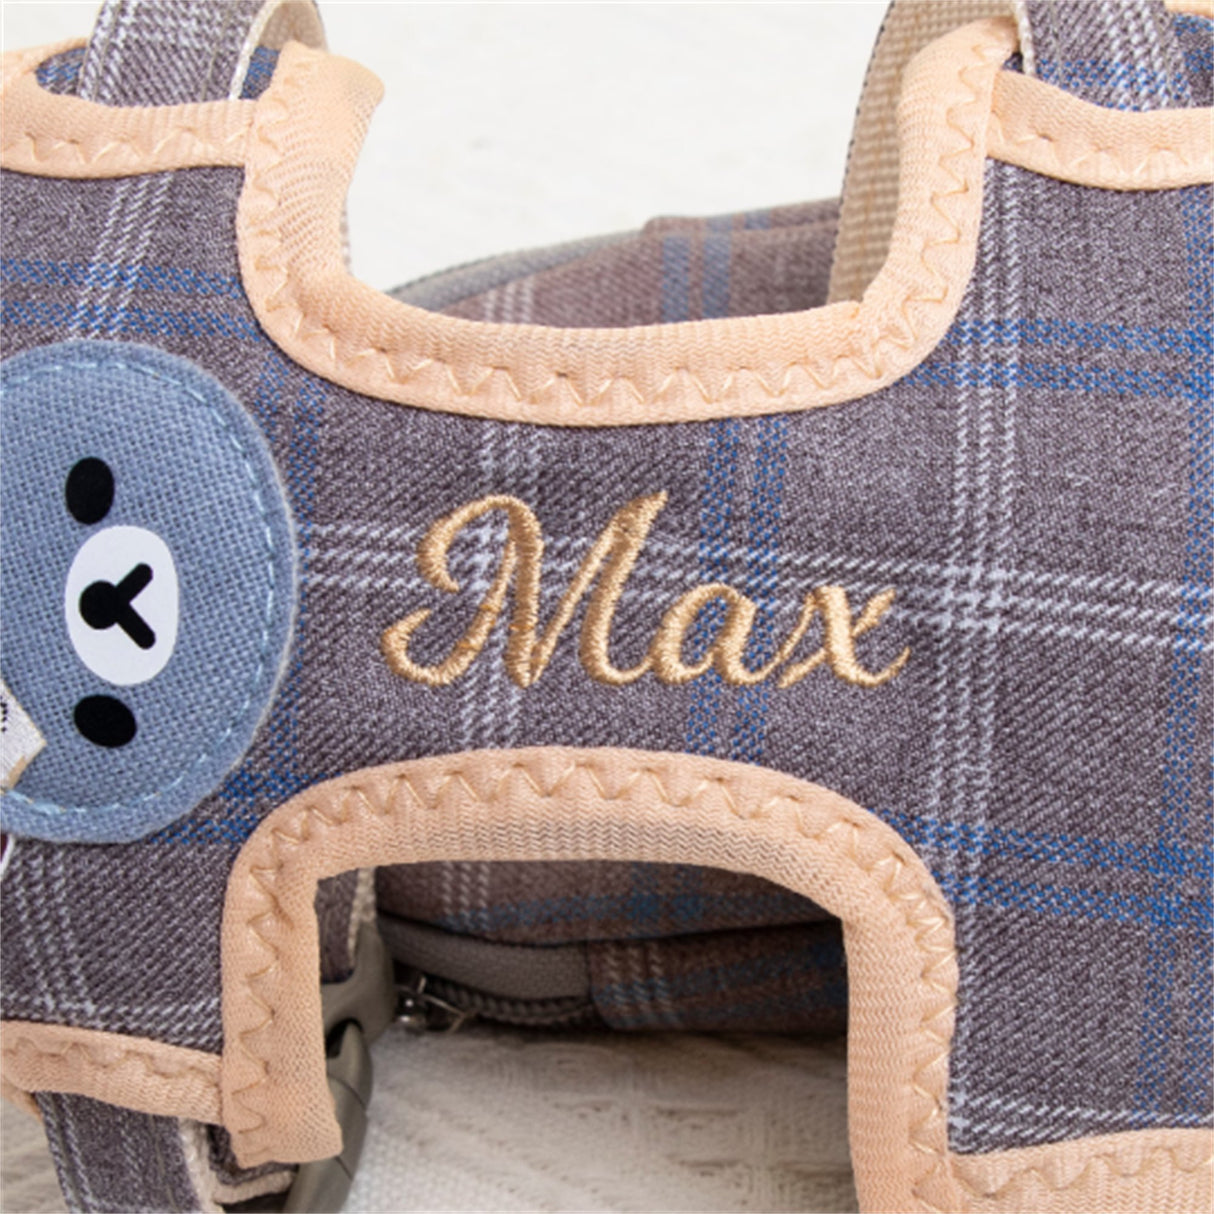 GEX Personalized Pet Harness Set for Small Dog Embroidery Name - GexWorldwide